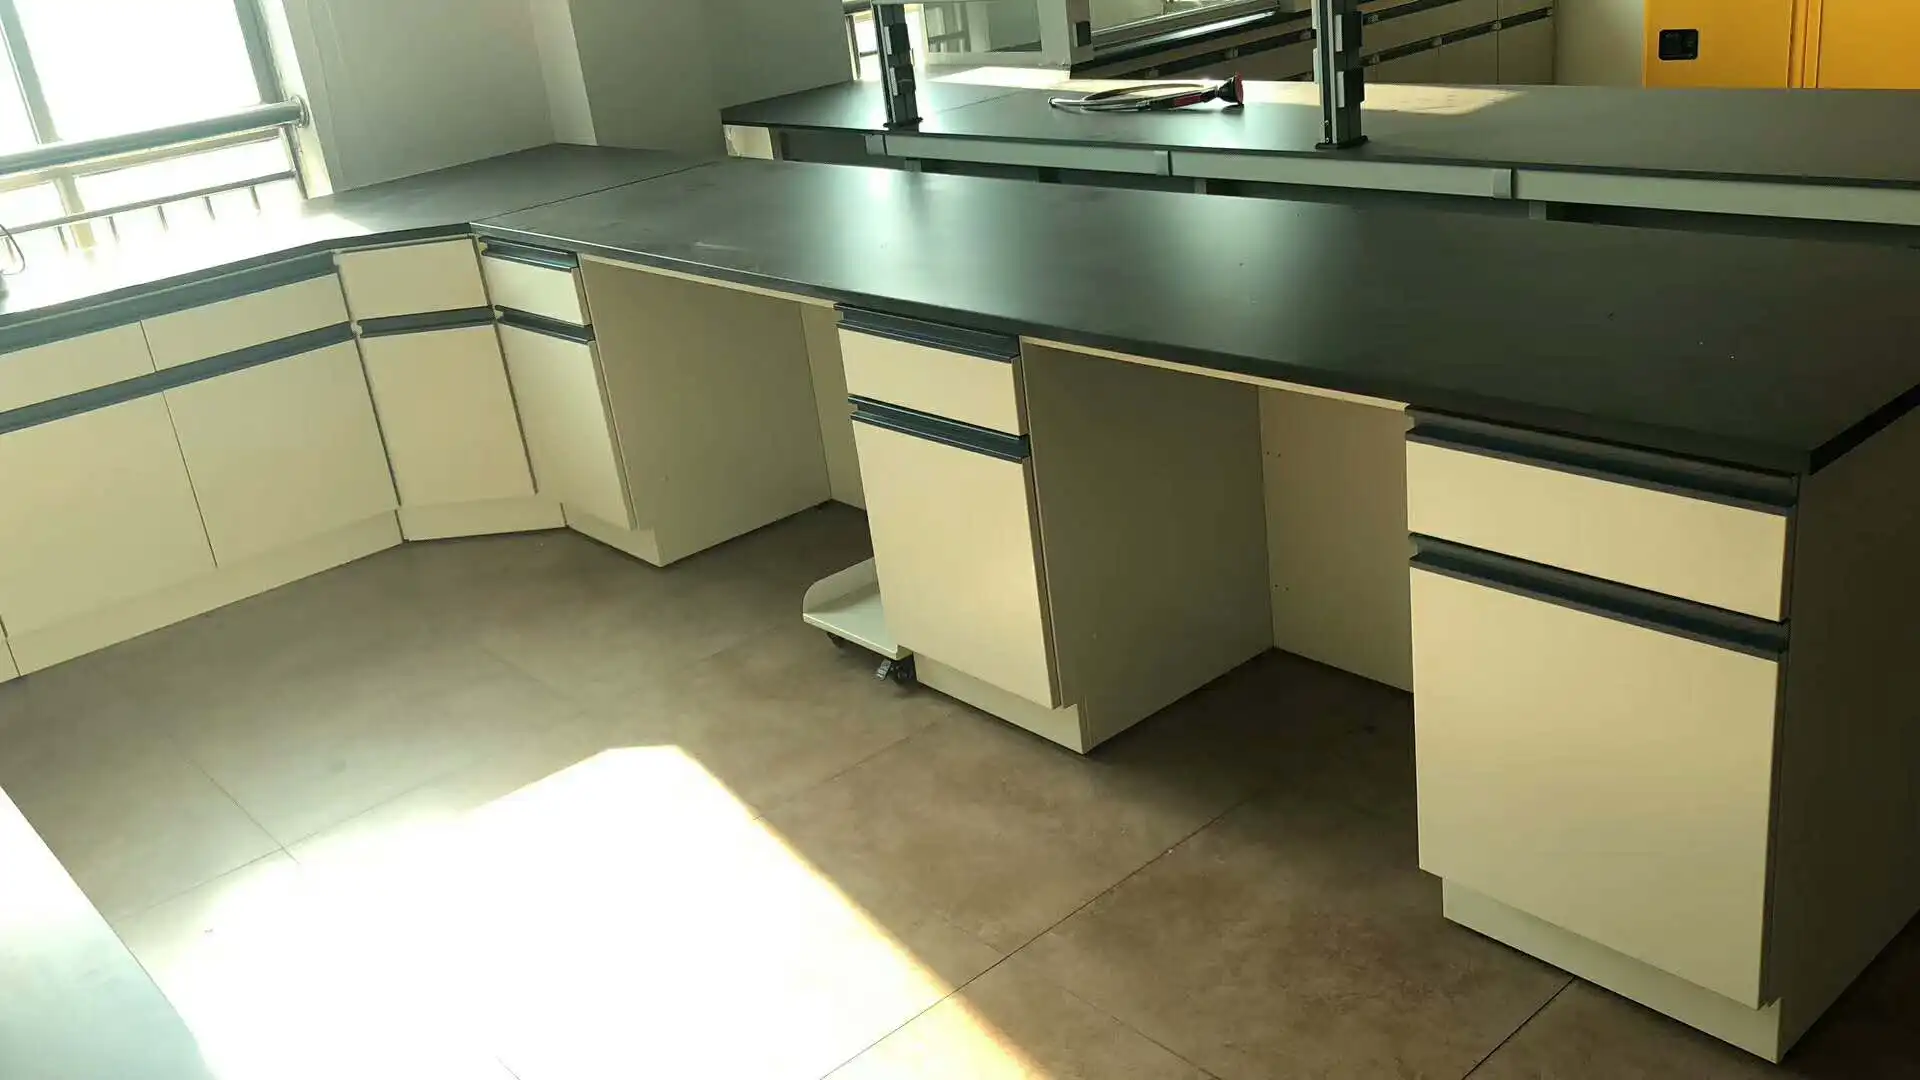 Lab table with reagent shelf drawer physical chemistry medical lab furniture customized laboratory workbench